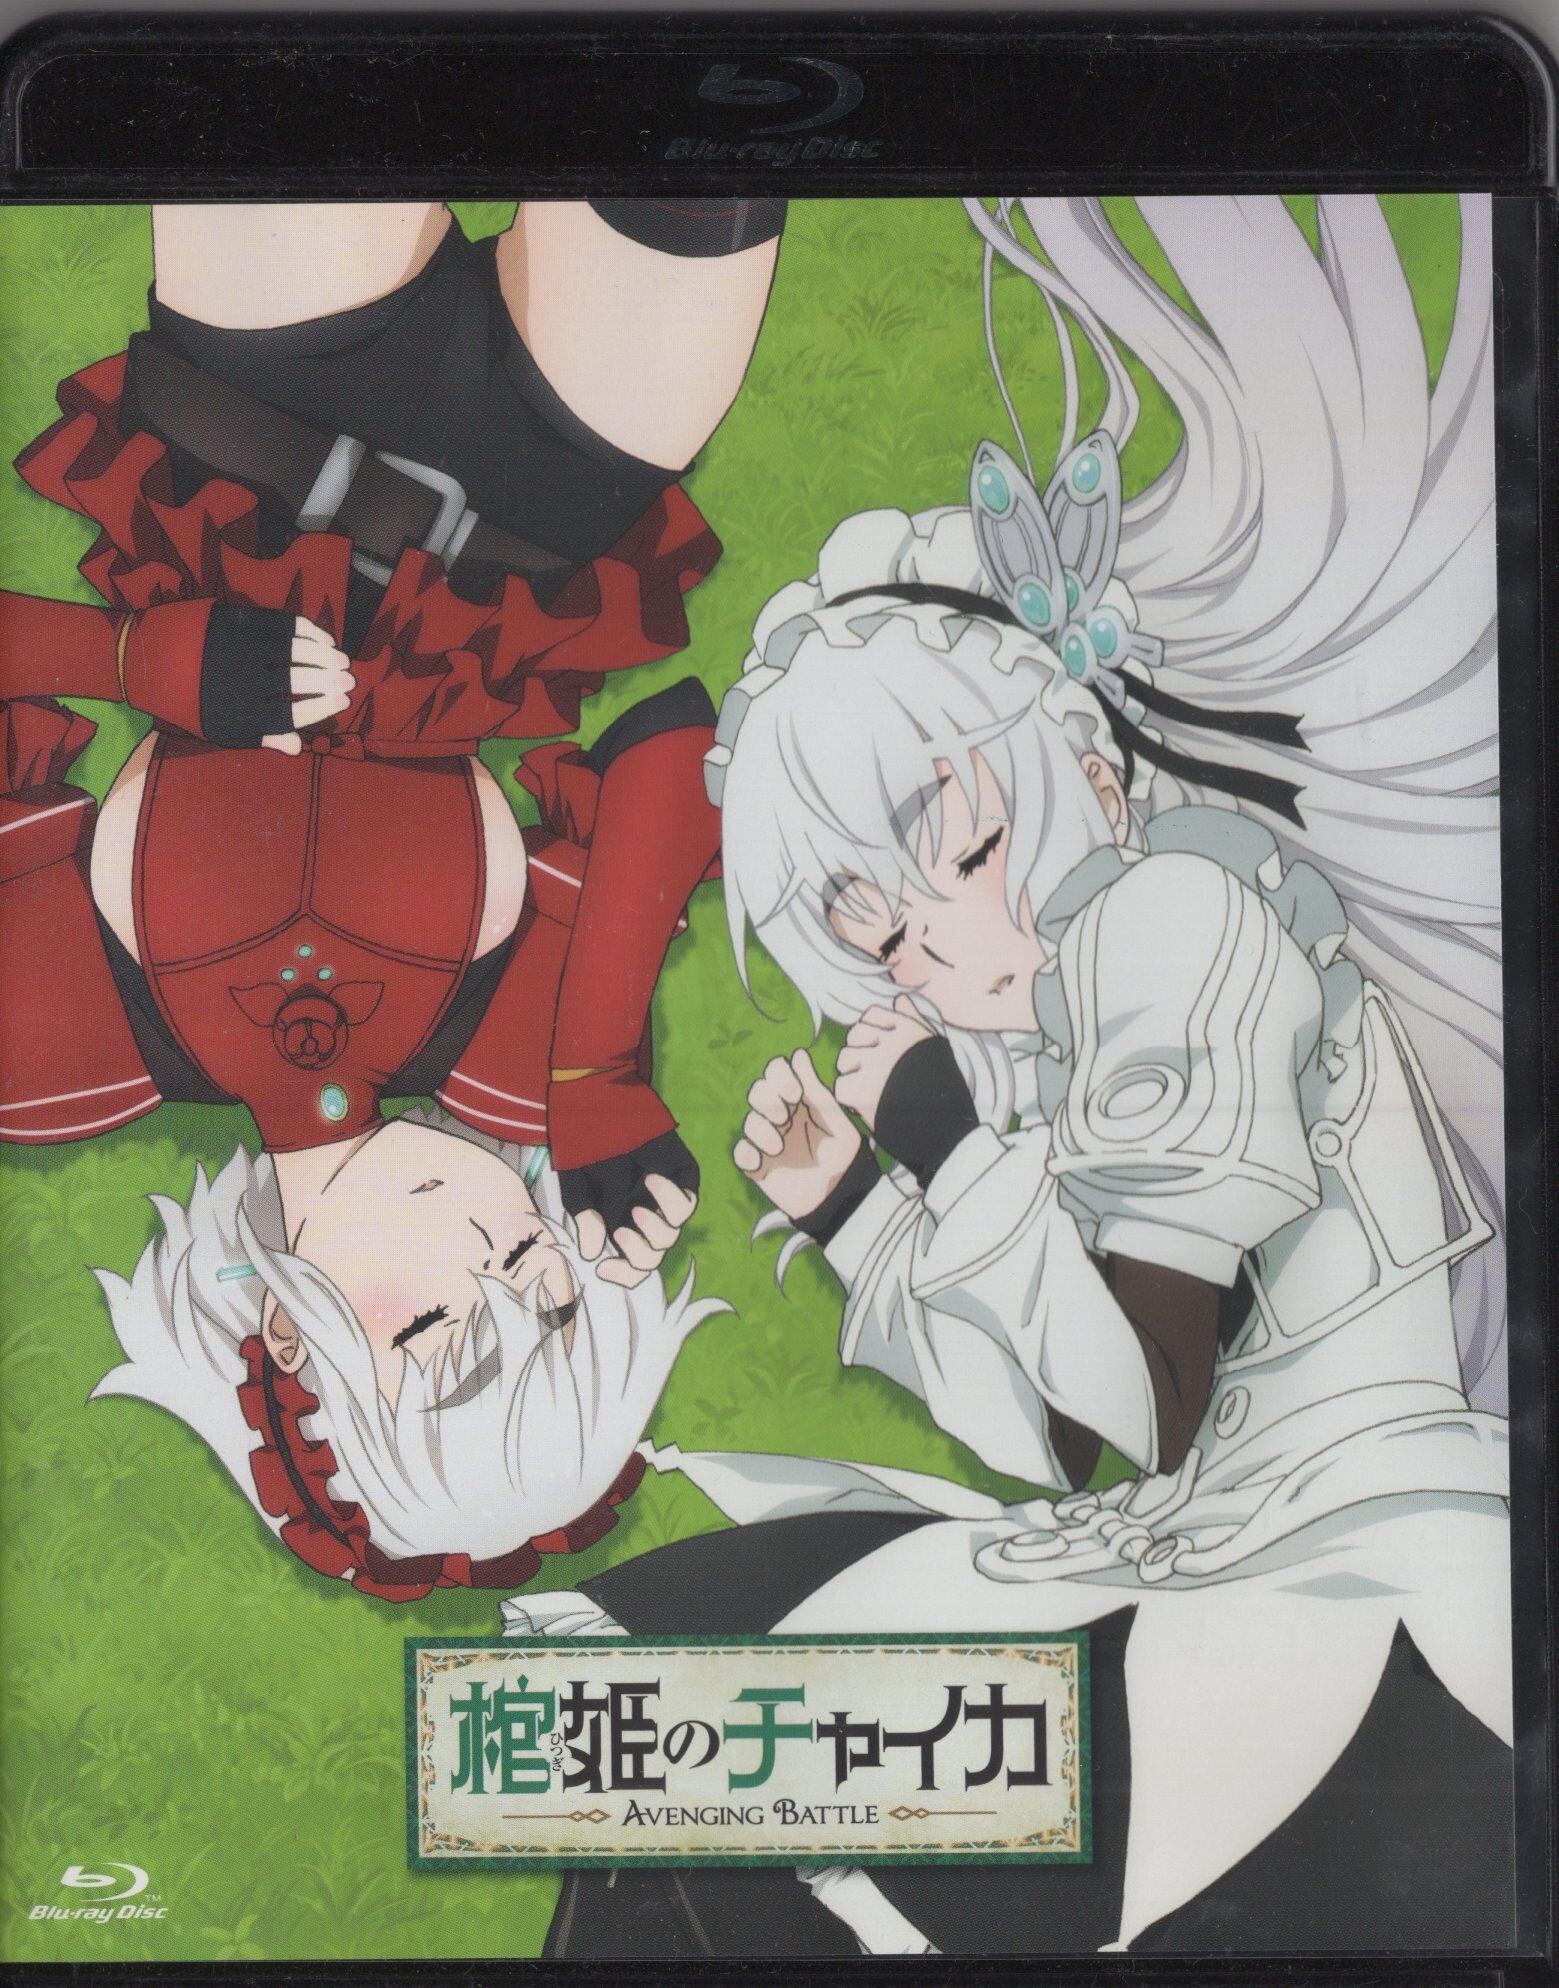 Amazon.com: Chaika-The Coffin Princess Anime Fabric Wall Scroll Poster (16  x 23) Inches [ACT]- Chaika Coffin-10: Posters & Prints